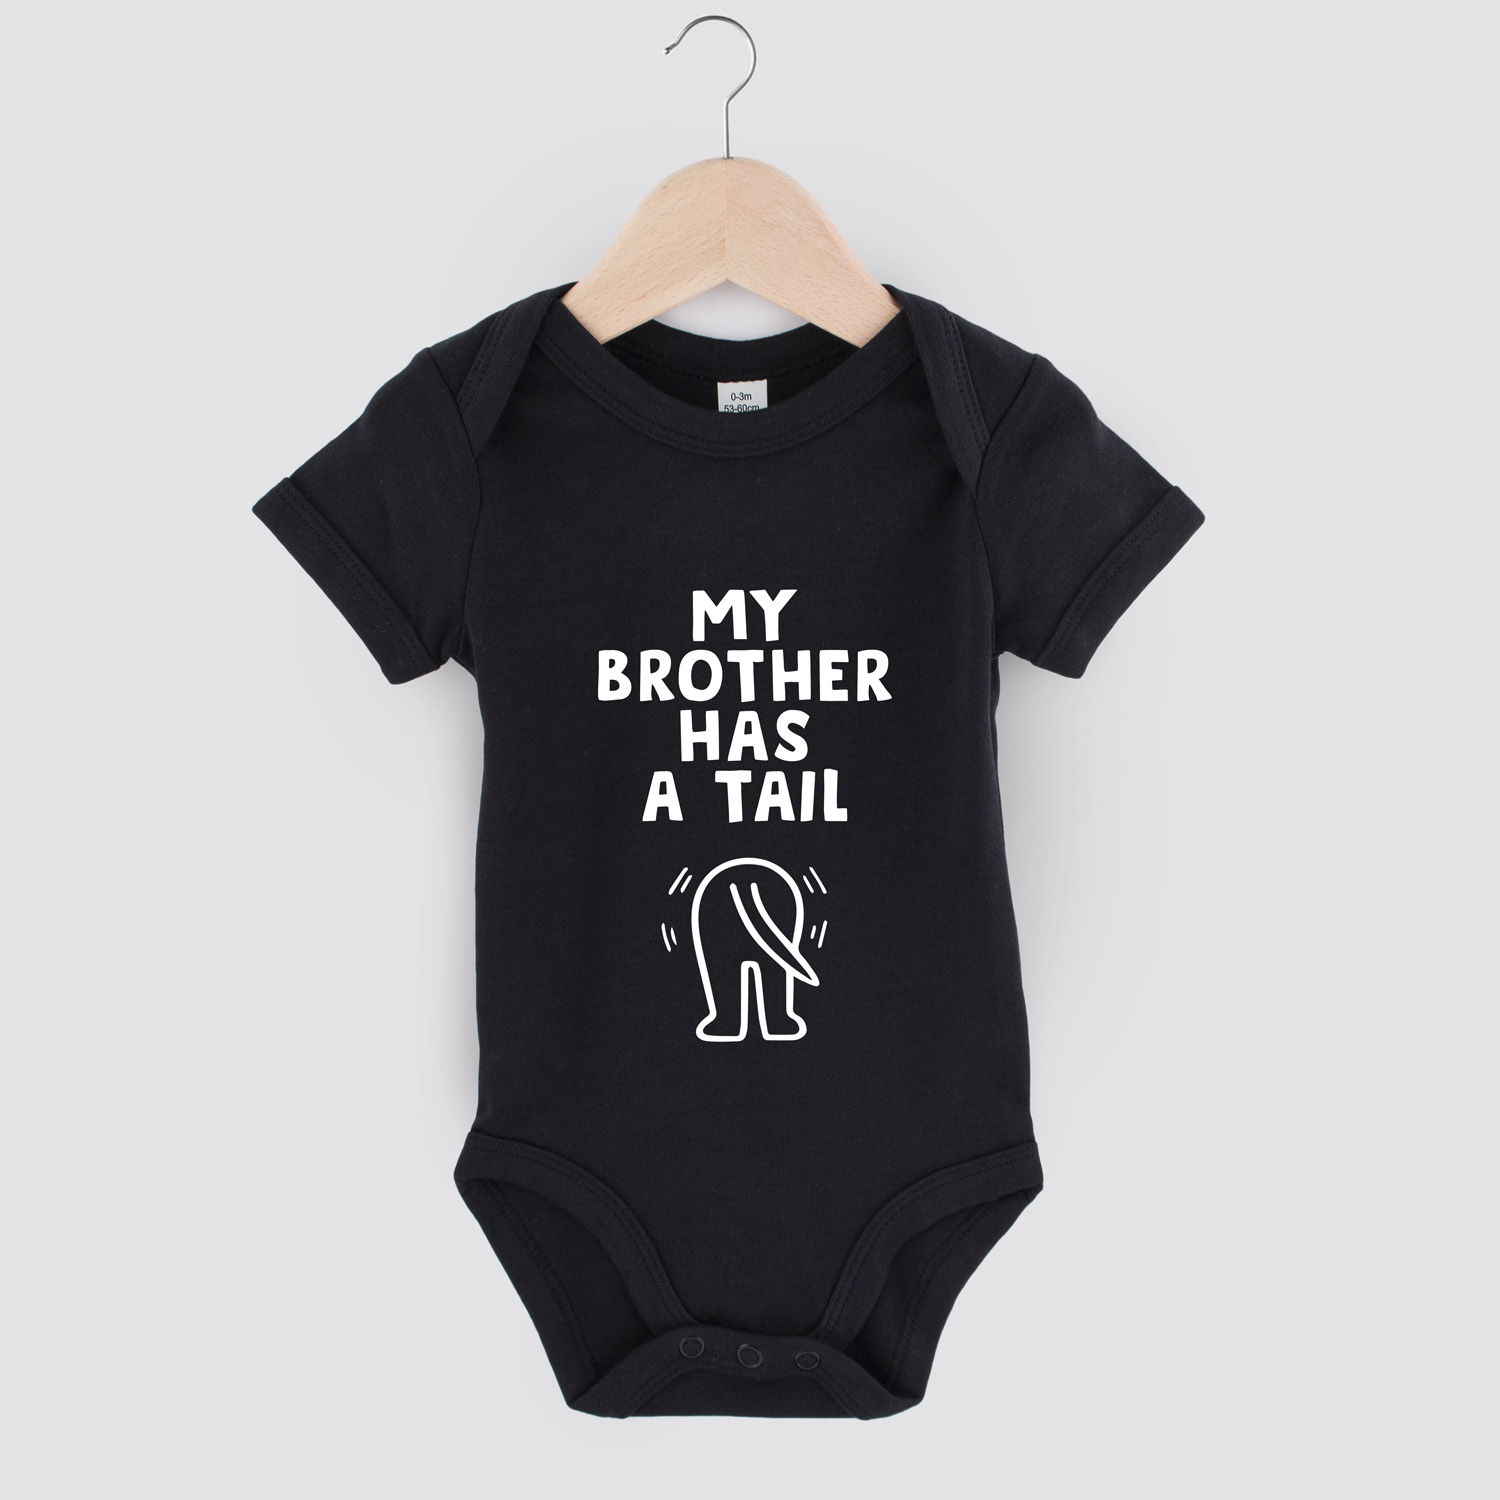 My brother has a tail | Baby romper | my fabulous life.